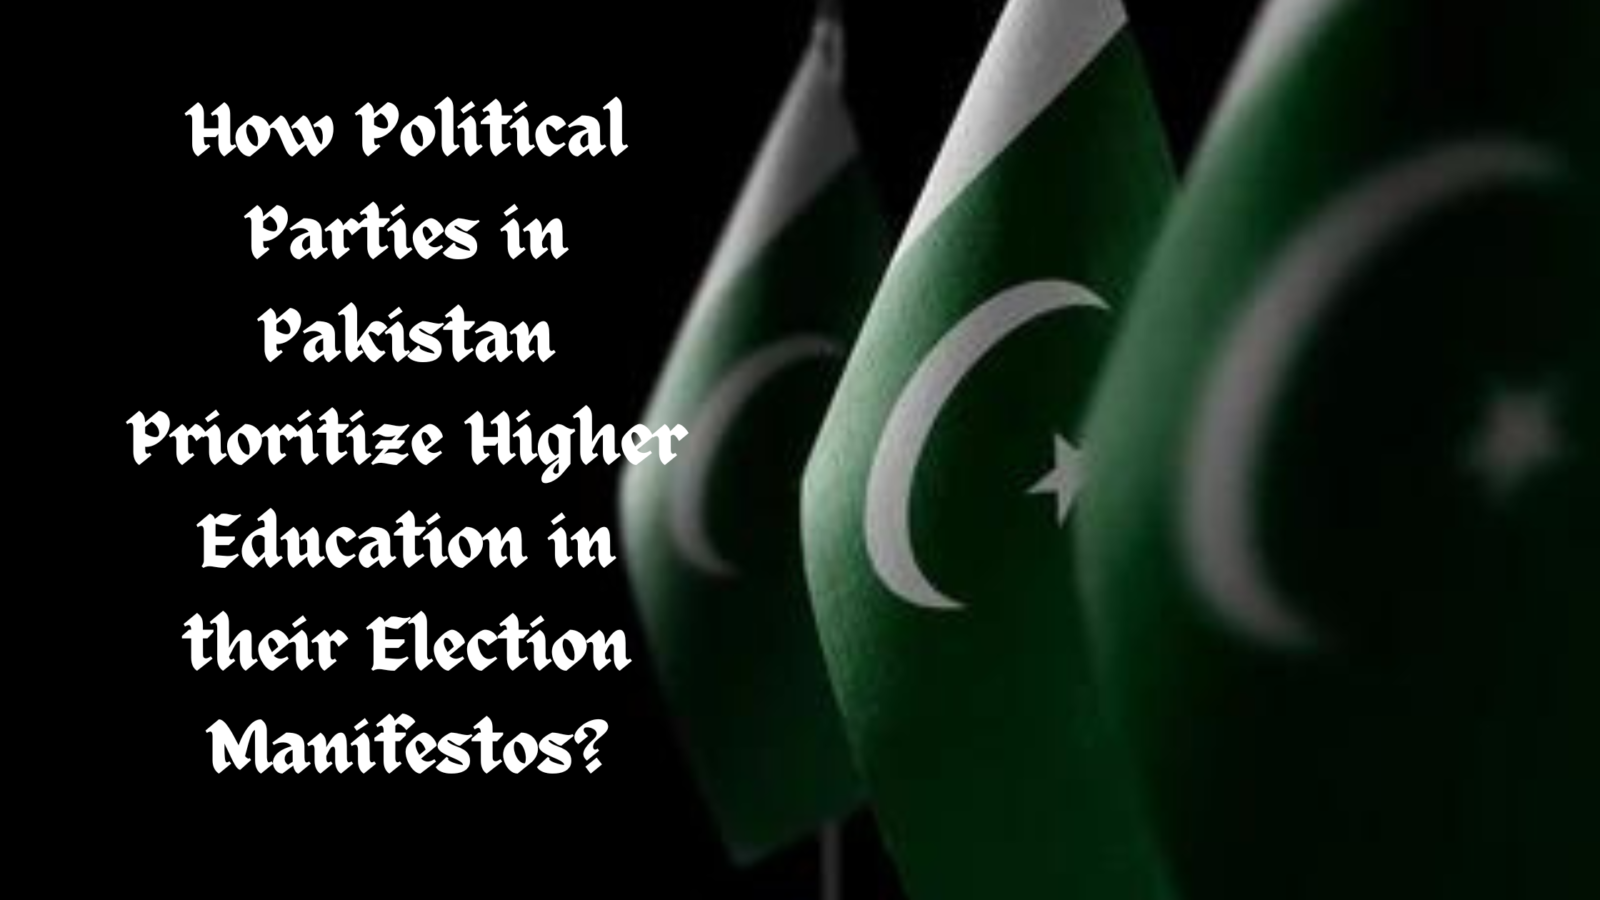 How Political Parties in Pakistan Prioritize Higher Education and Universities in their Election Manifestos